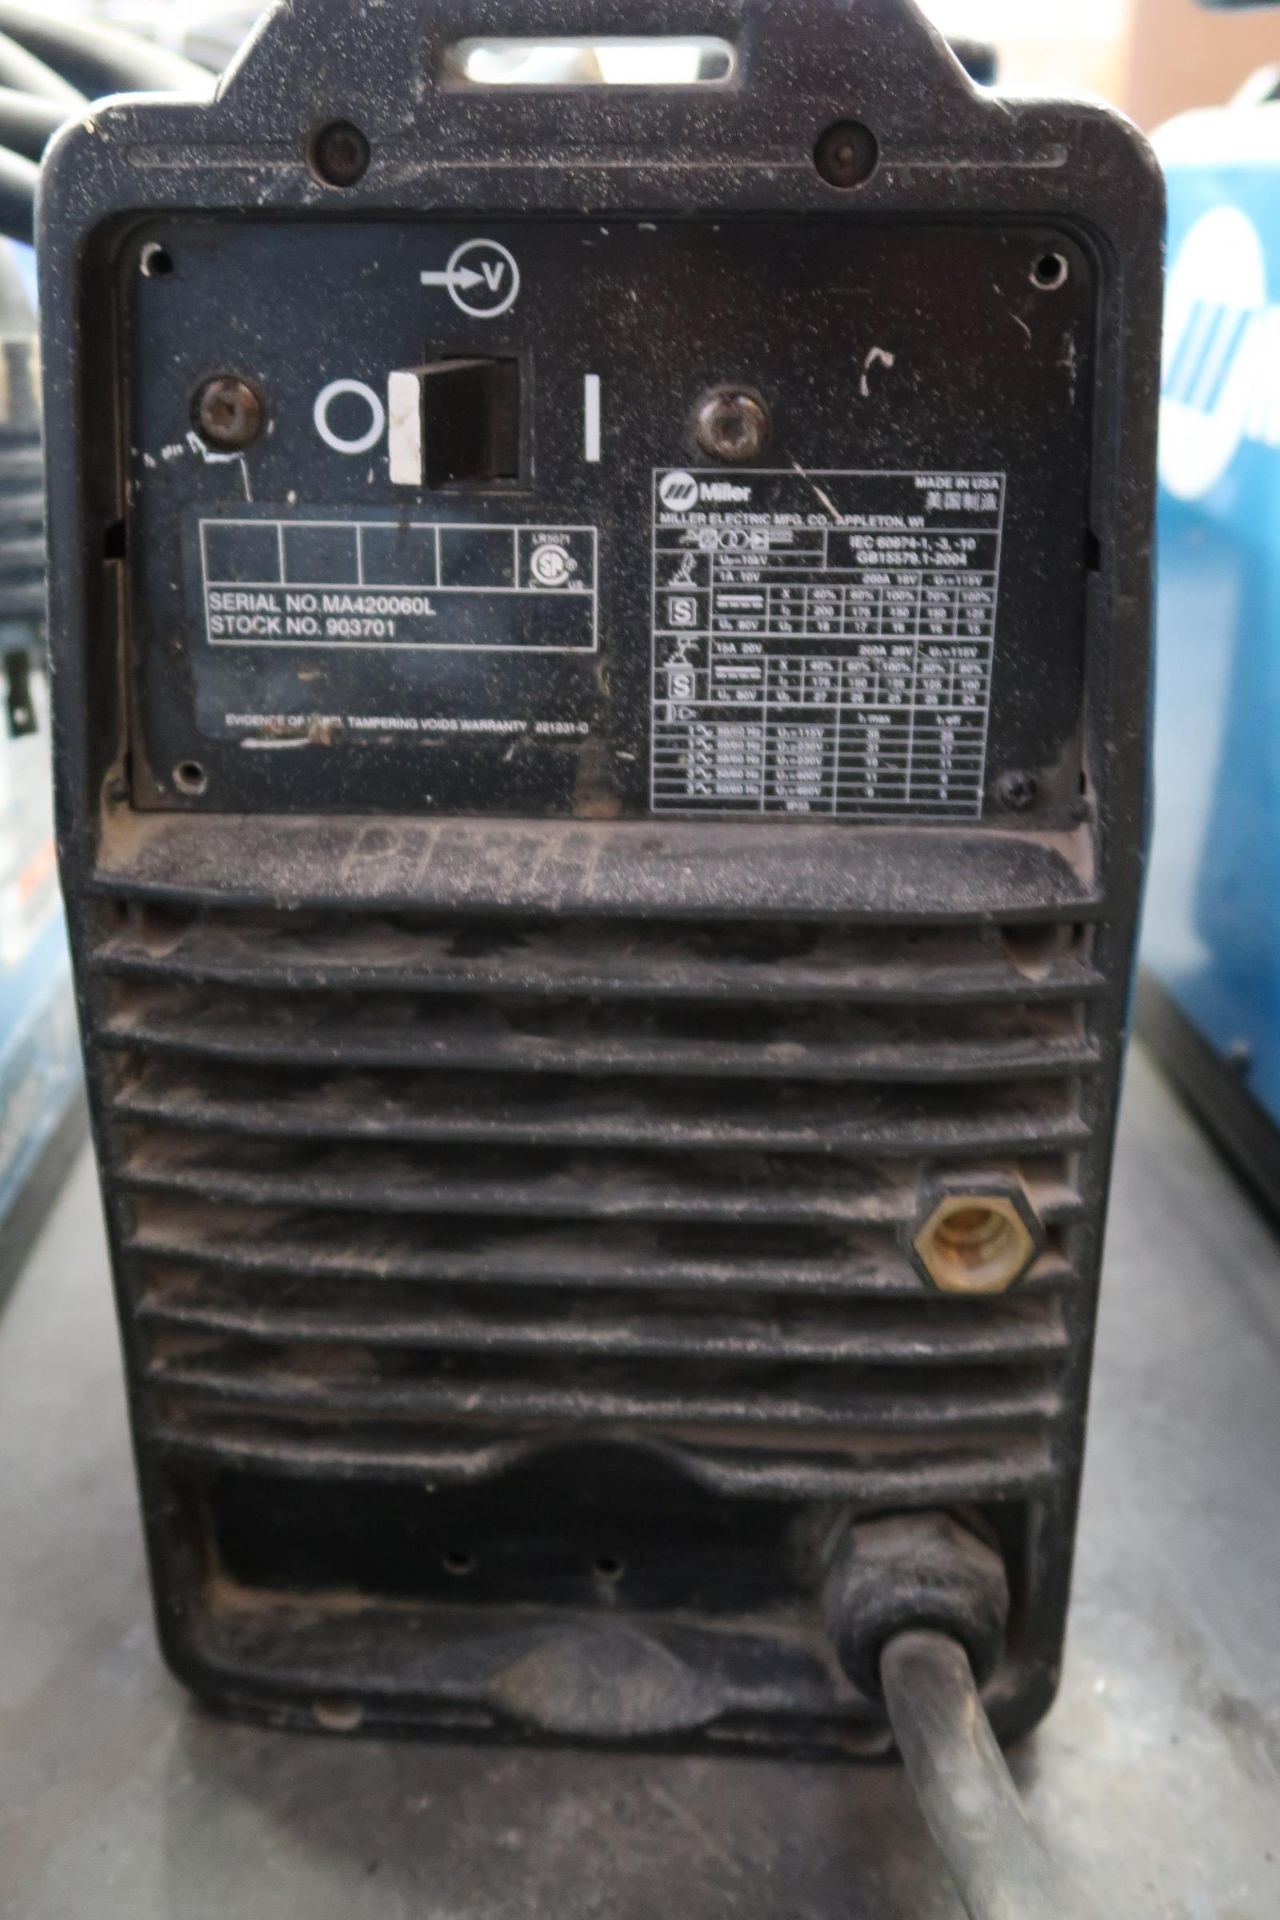 Miller CST280 Arc Welding Power Source s/n MA420060L (SOLD AS-IS - NO WARRANTY) - Image 3 of 5